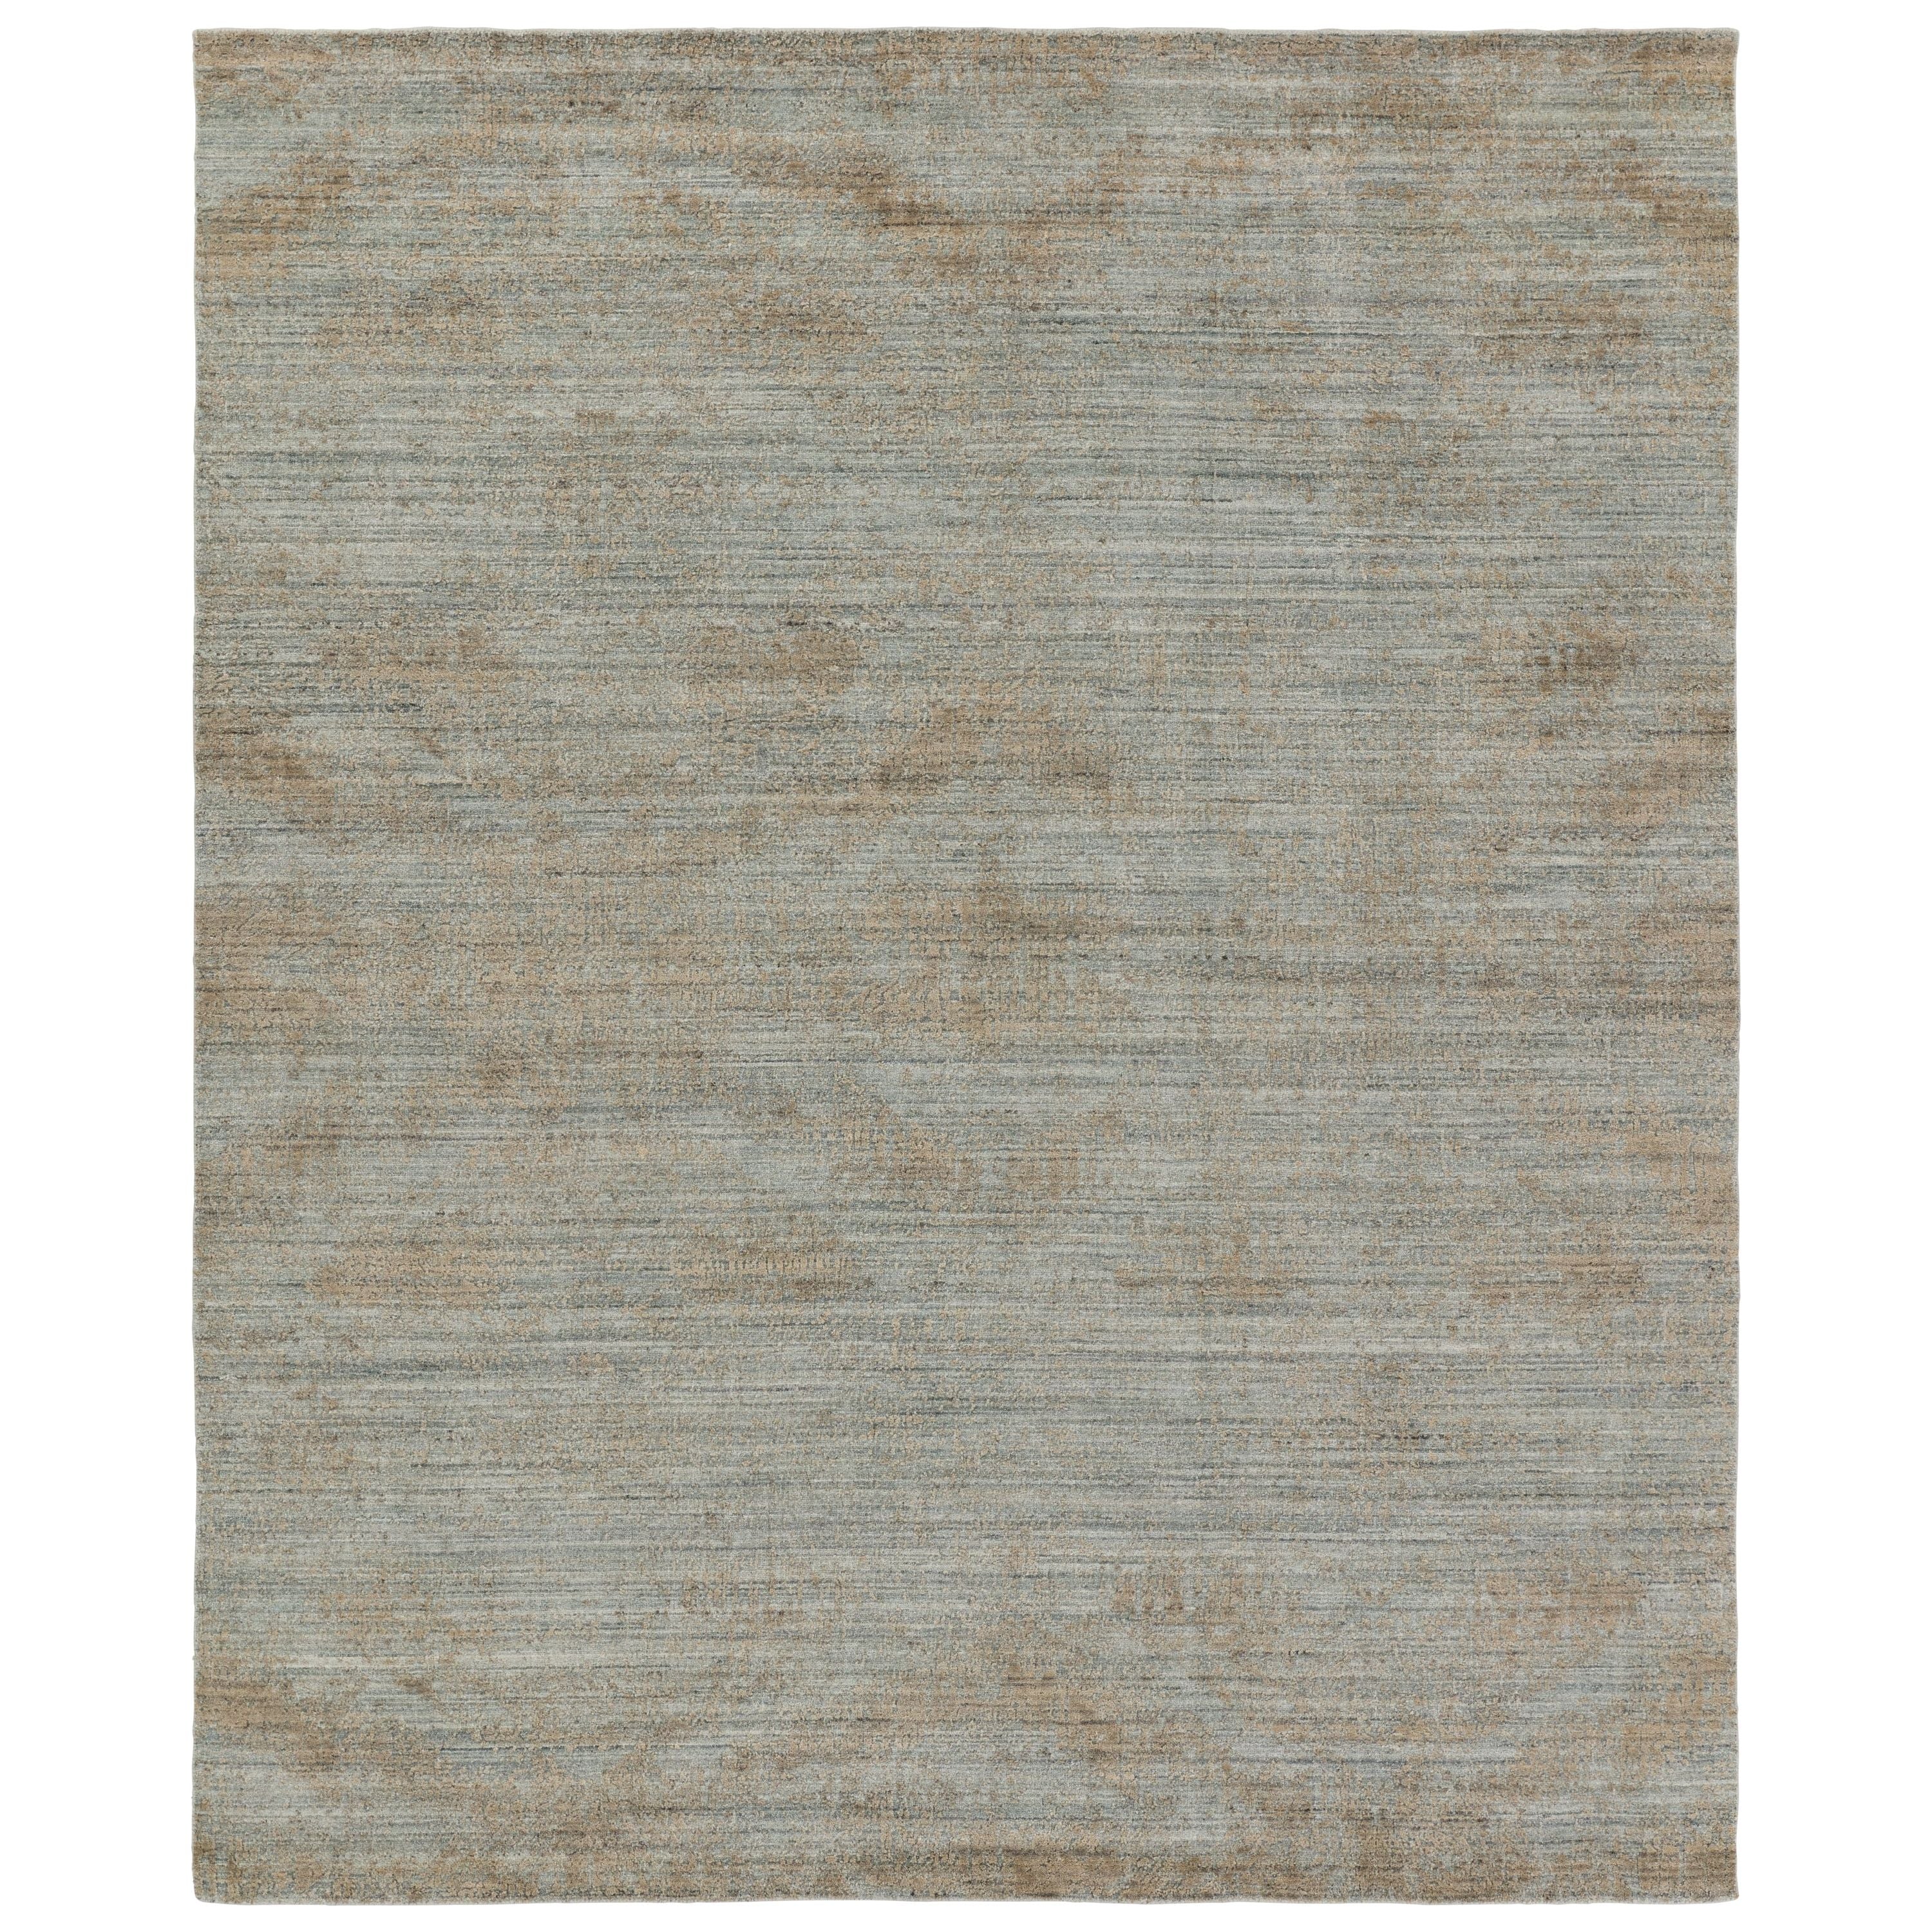 The elegant and modernized designs of the Genevieve collection feature an exquisite hand-loomed jacquard weave with stunning texture. The Arano rug boasts hand-embossed details in a balanced, versatile colorway of taupe, tan, gray, and cream tones. A blend of wool and soft viscose lends dimension and depth to this handwoven rug. Amethyst Home provides interior design, new construction, custom furniture, and area rugs in the Nashville metro area.